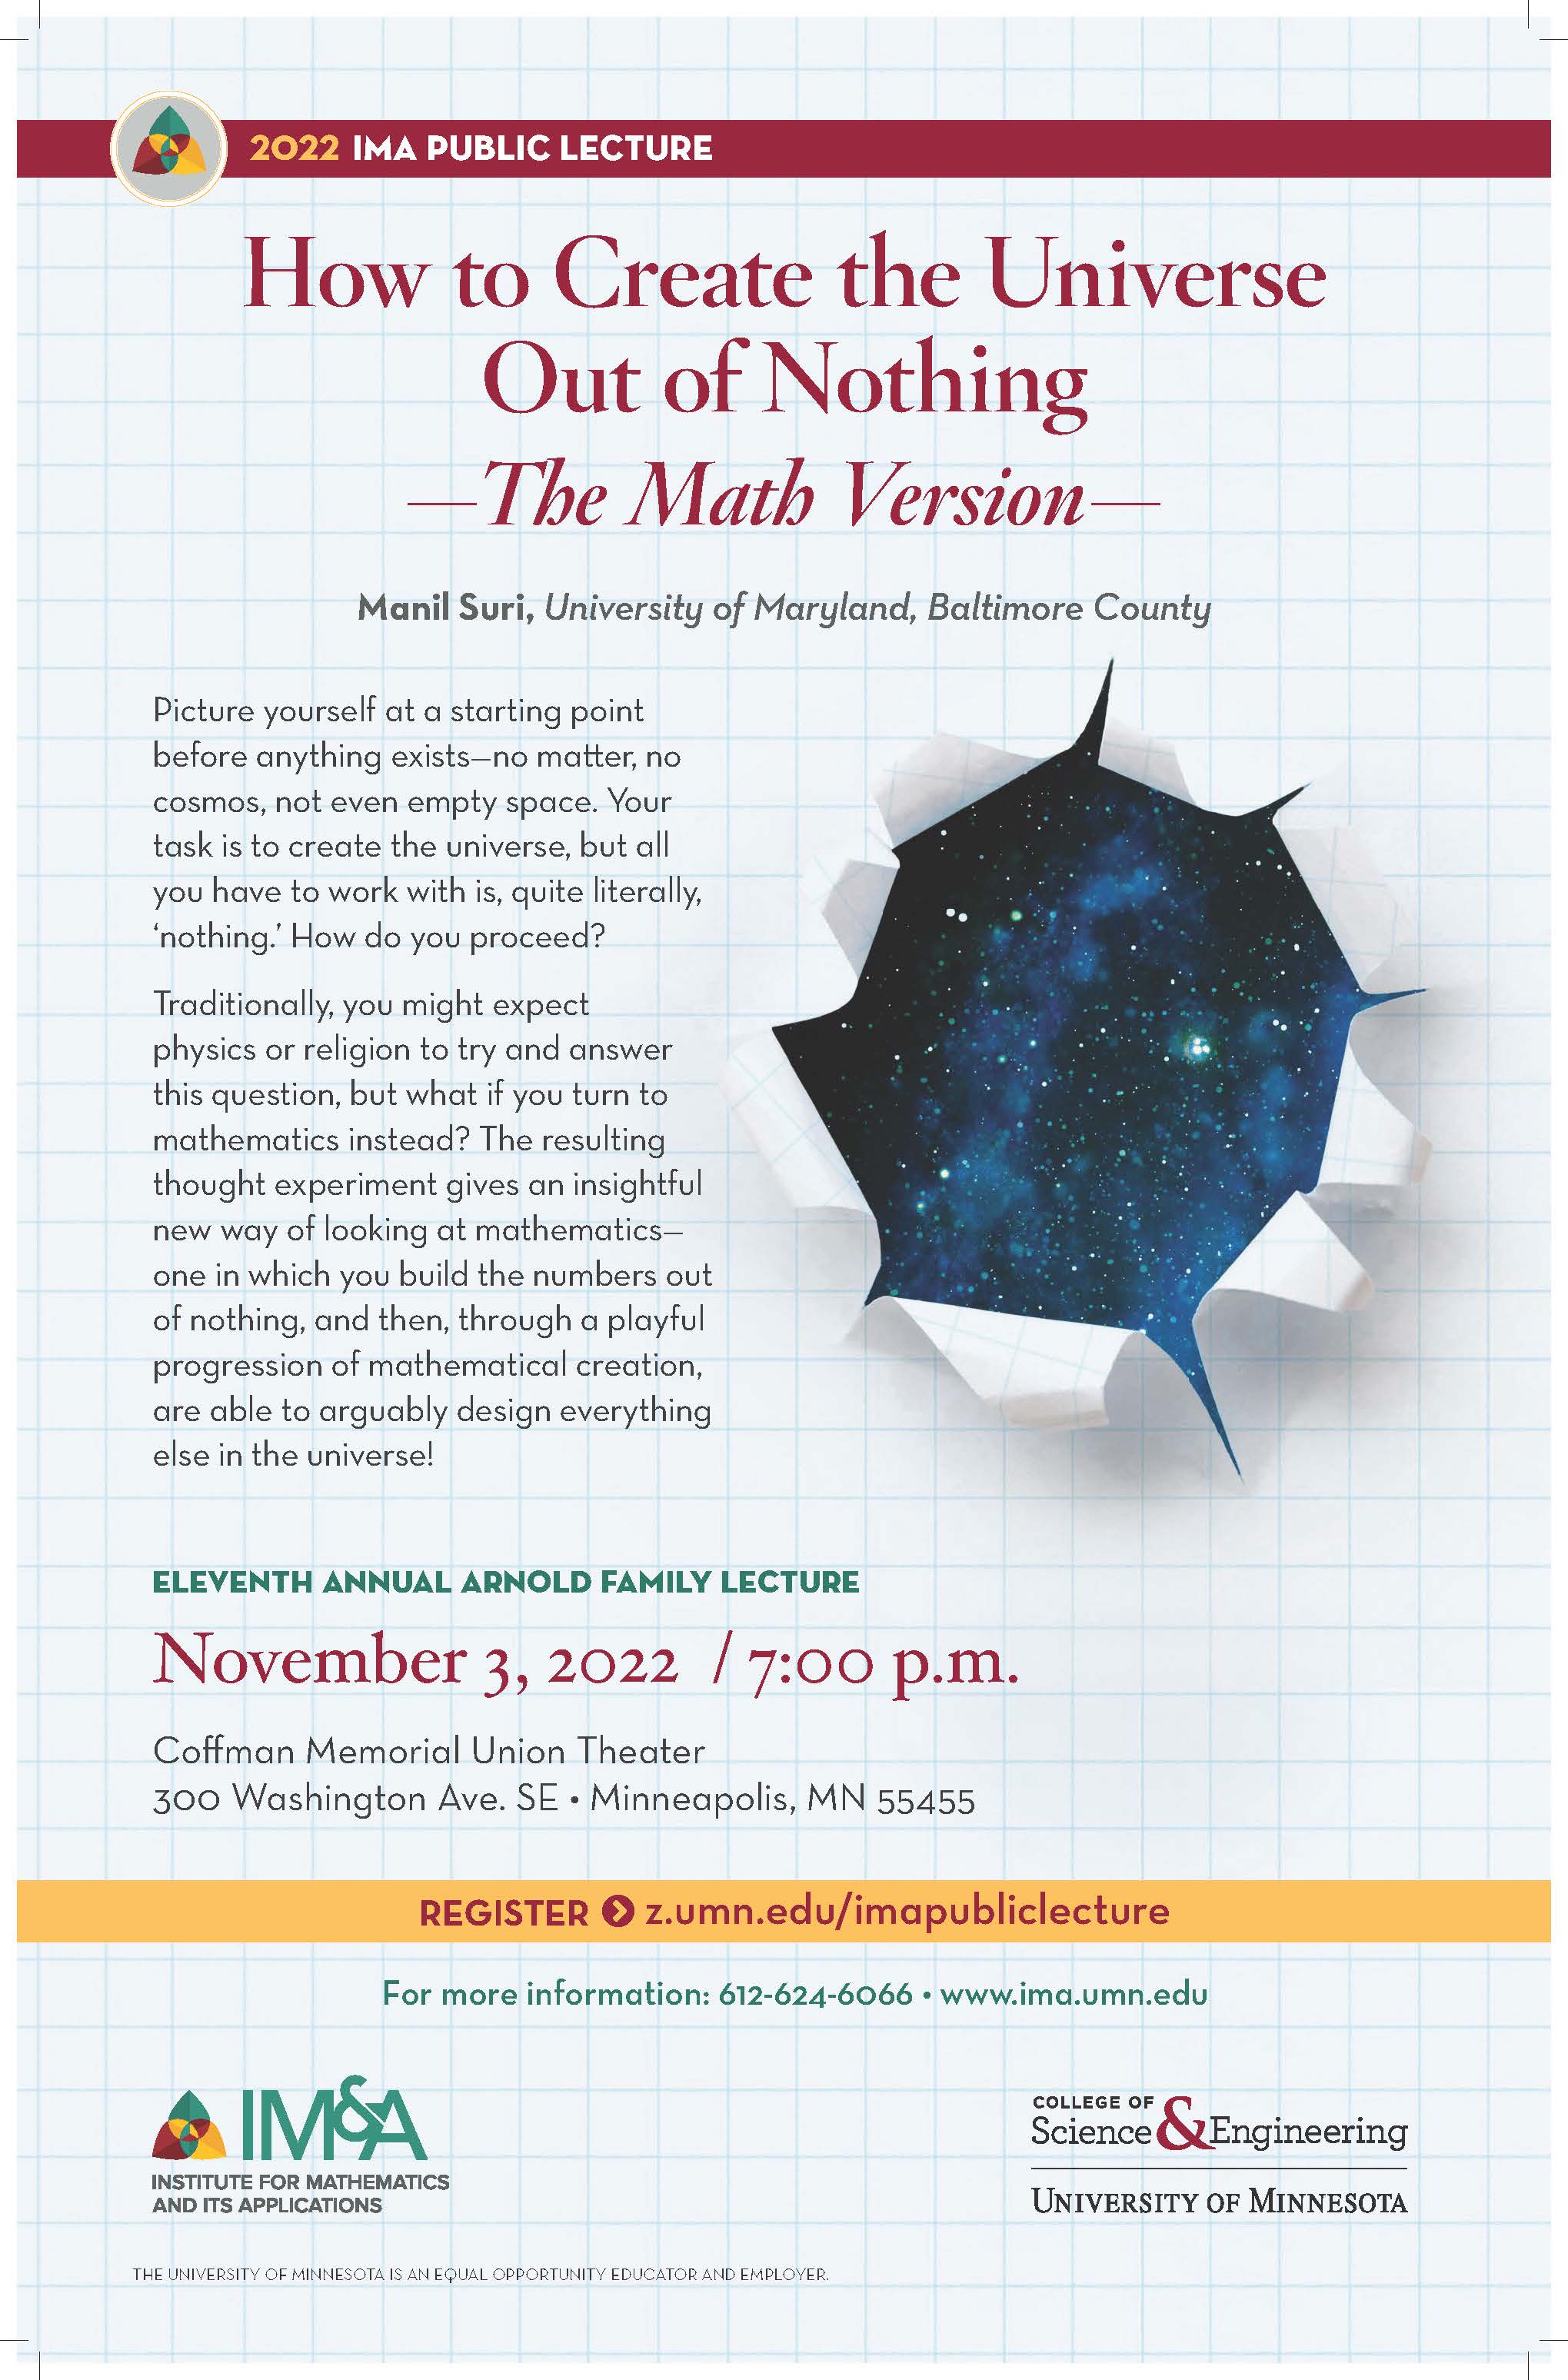 Poster about November 3 conference that says "How to create the universe out of nothing (Math version)" 